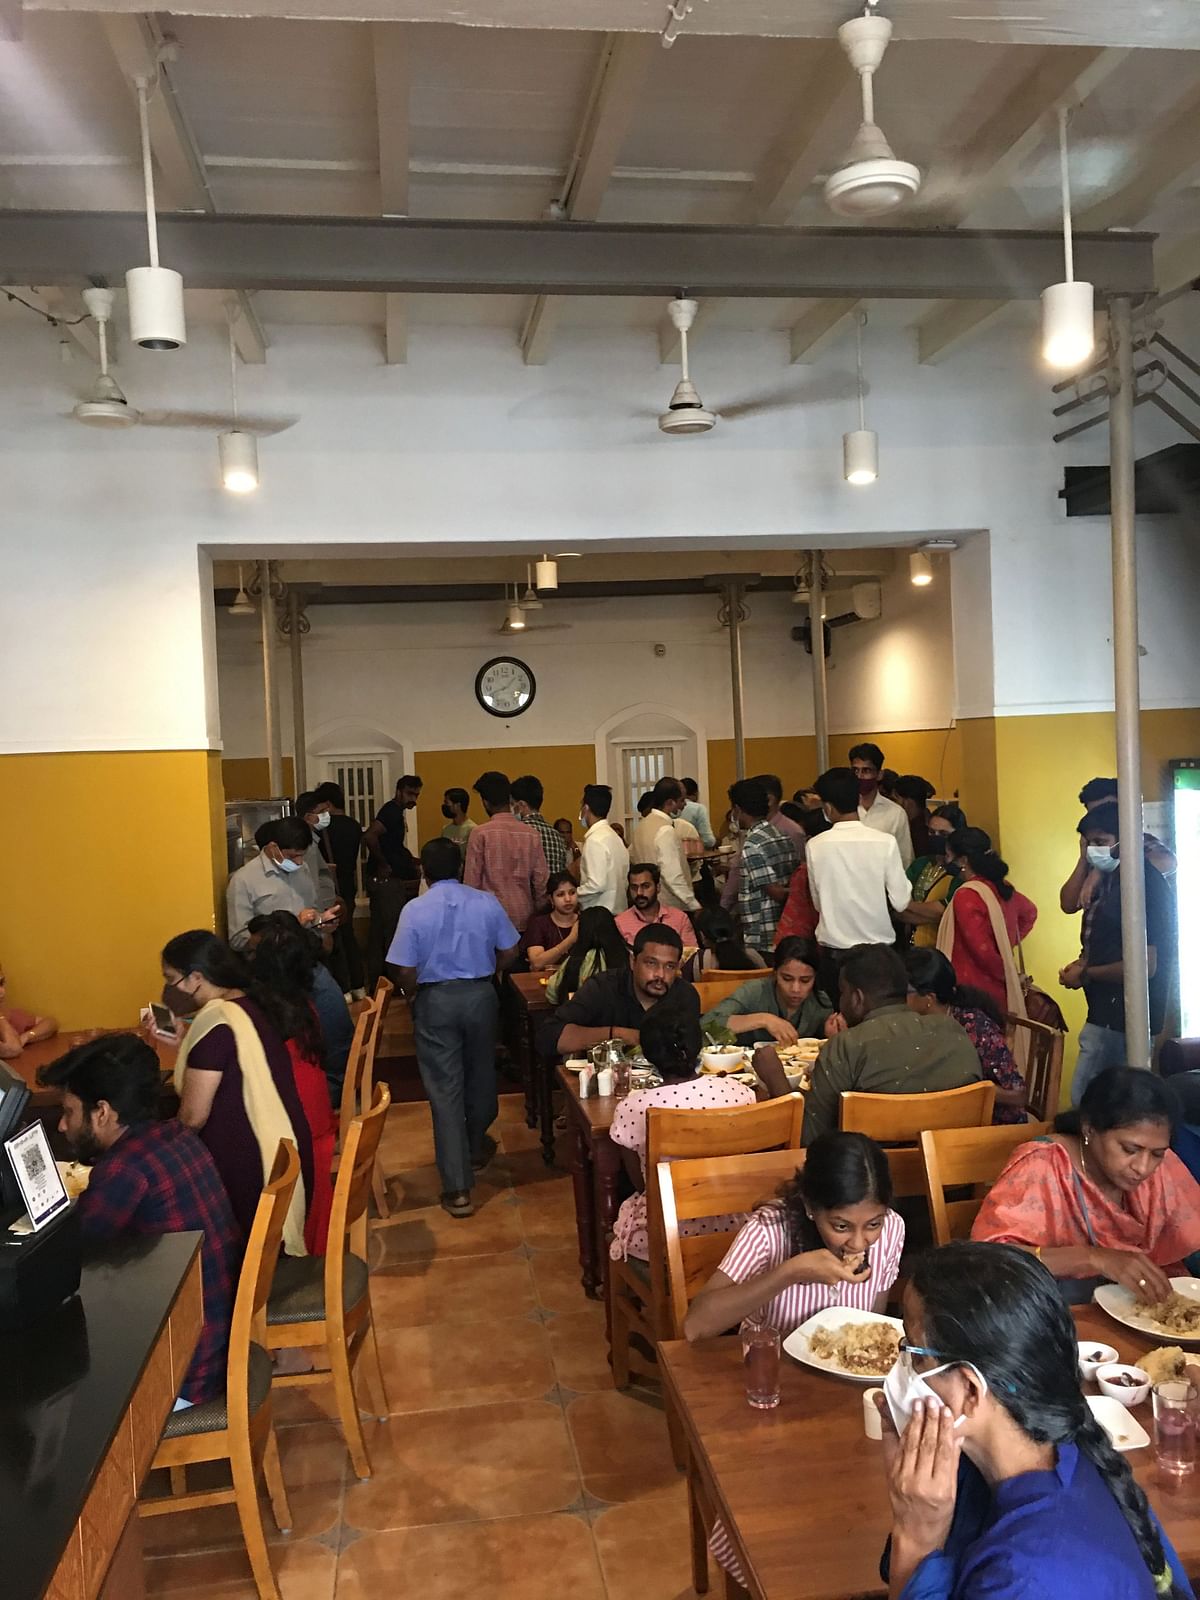 The BJP "preferred" that Paragon owner Sumesh Govind declare his restaurant's food non-halal. 